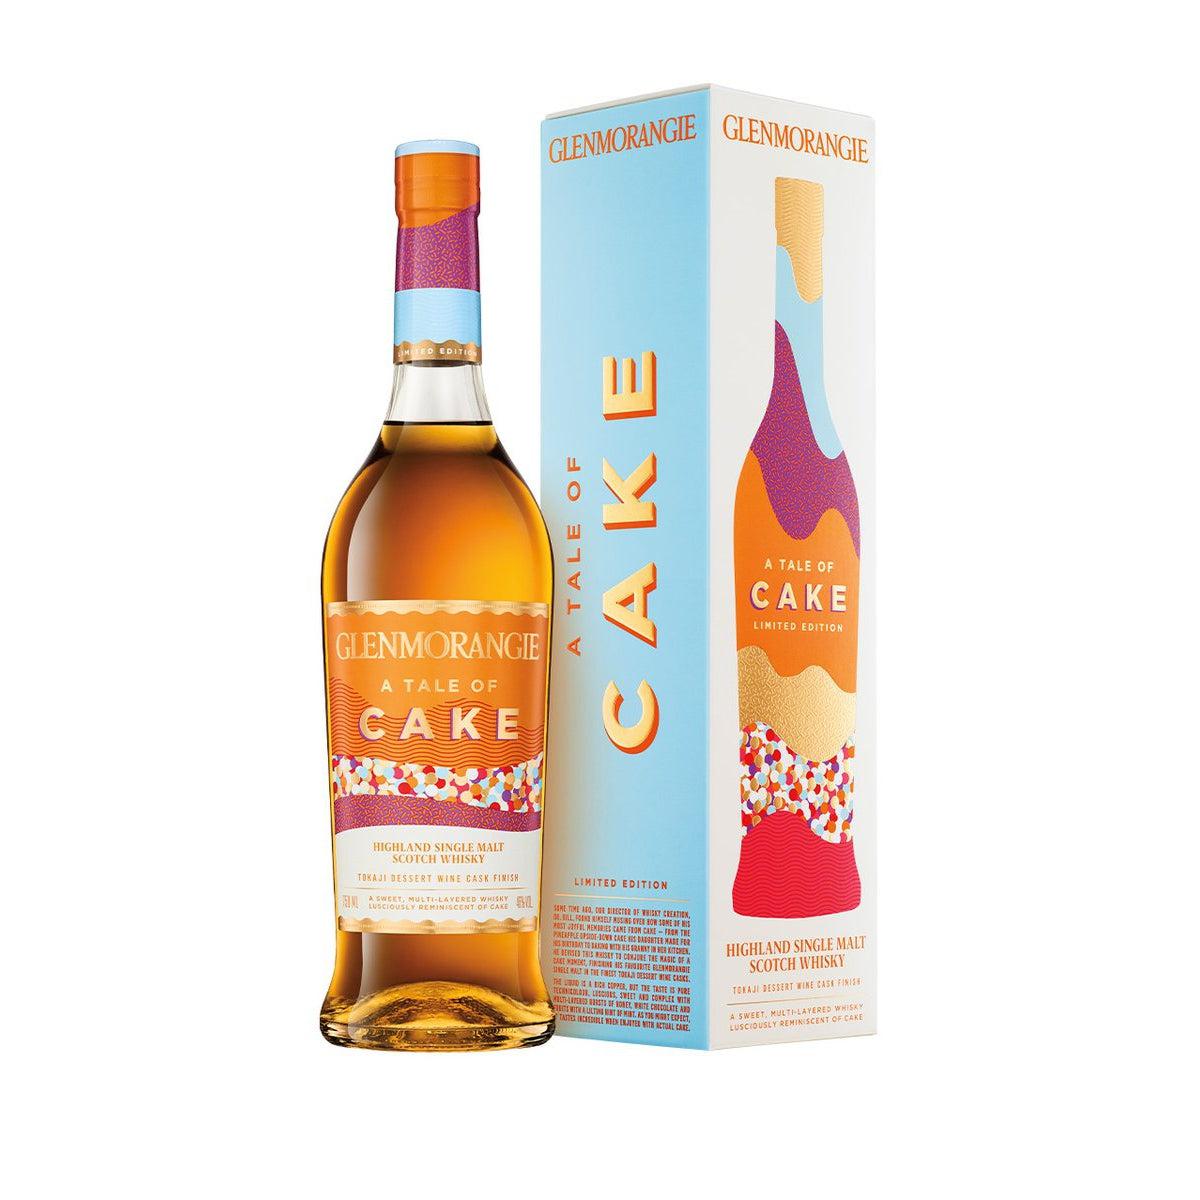 Glenmorangie A Tale of Cake Limited Edition